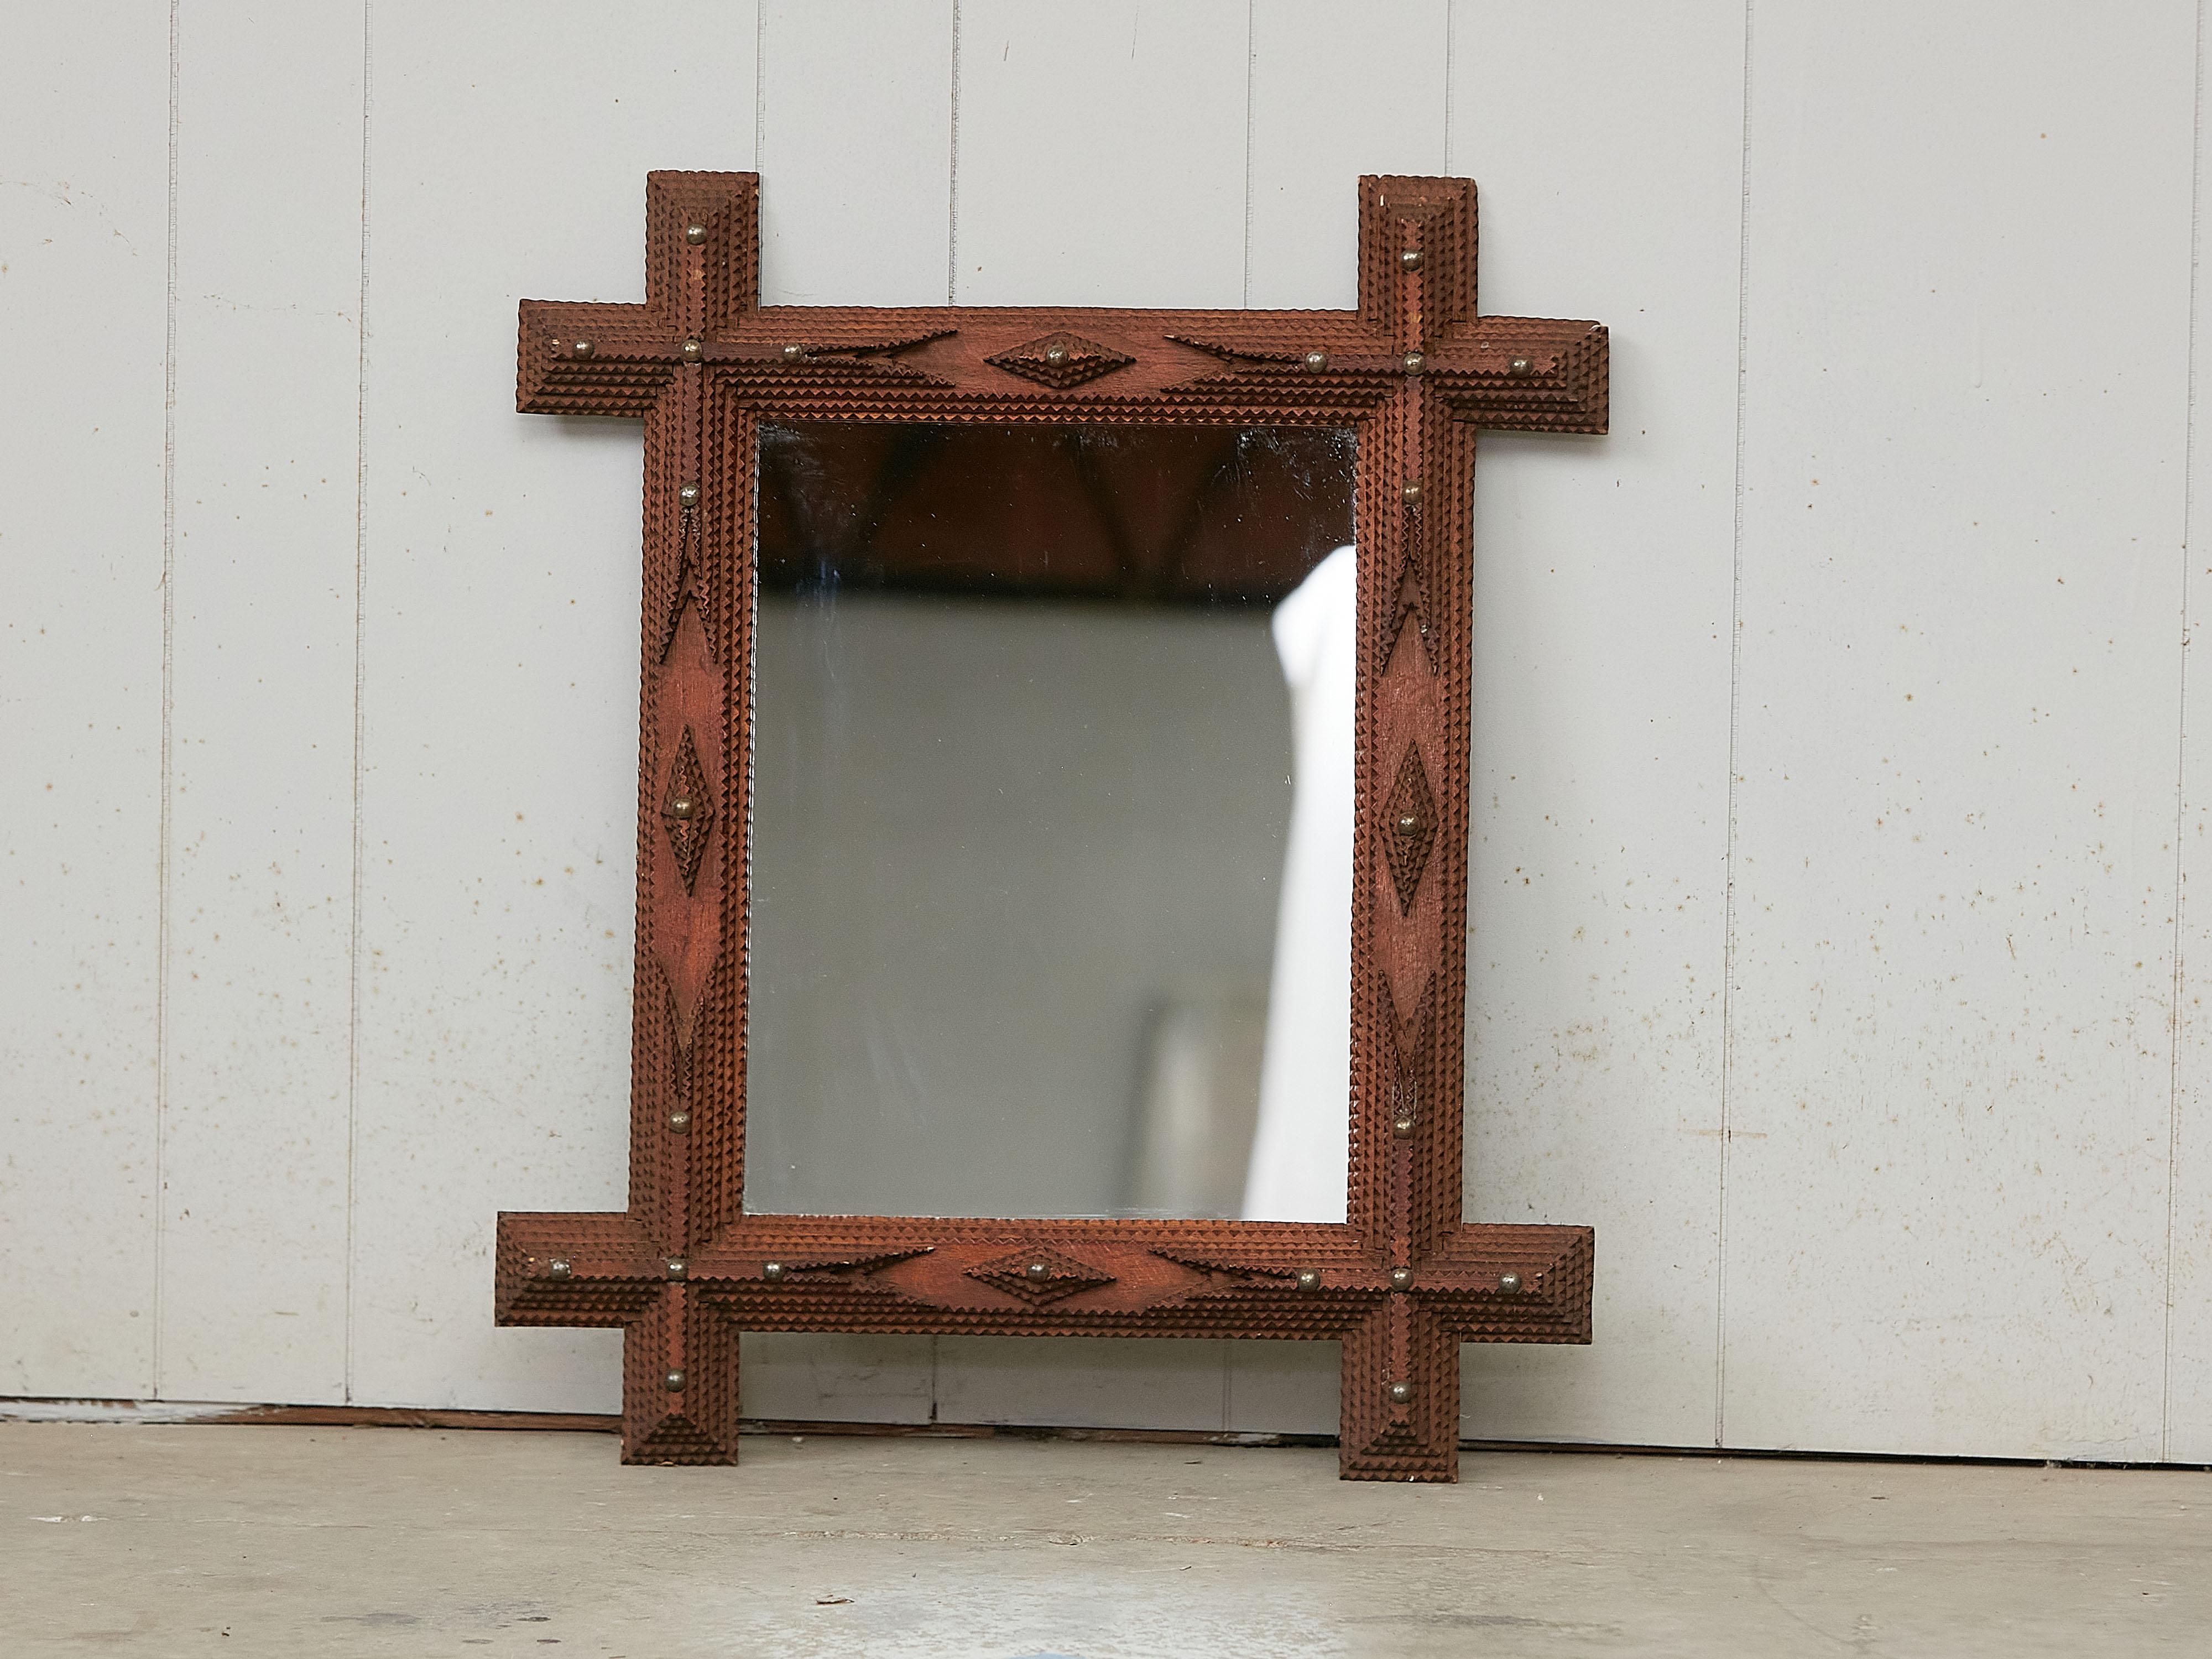 A French rectangular Tramp Art hand-carved wooden Folk mirror from the early 20th century, with raised diamond motifs, geometric patterns, intersecting corners and brass tacks. Created in France during the Turn of the Century which saw the